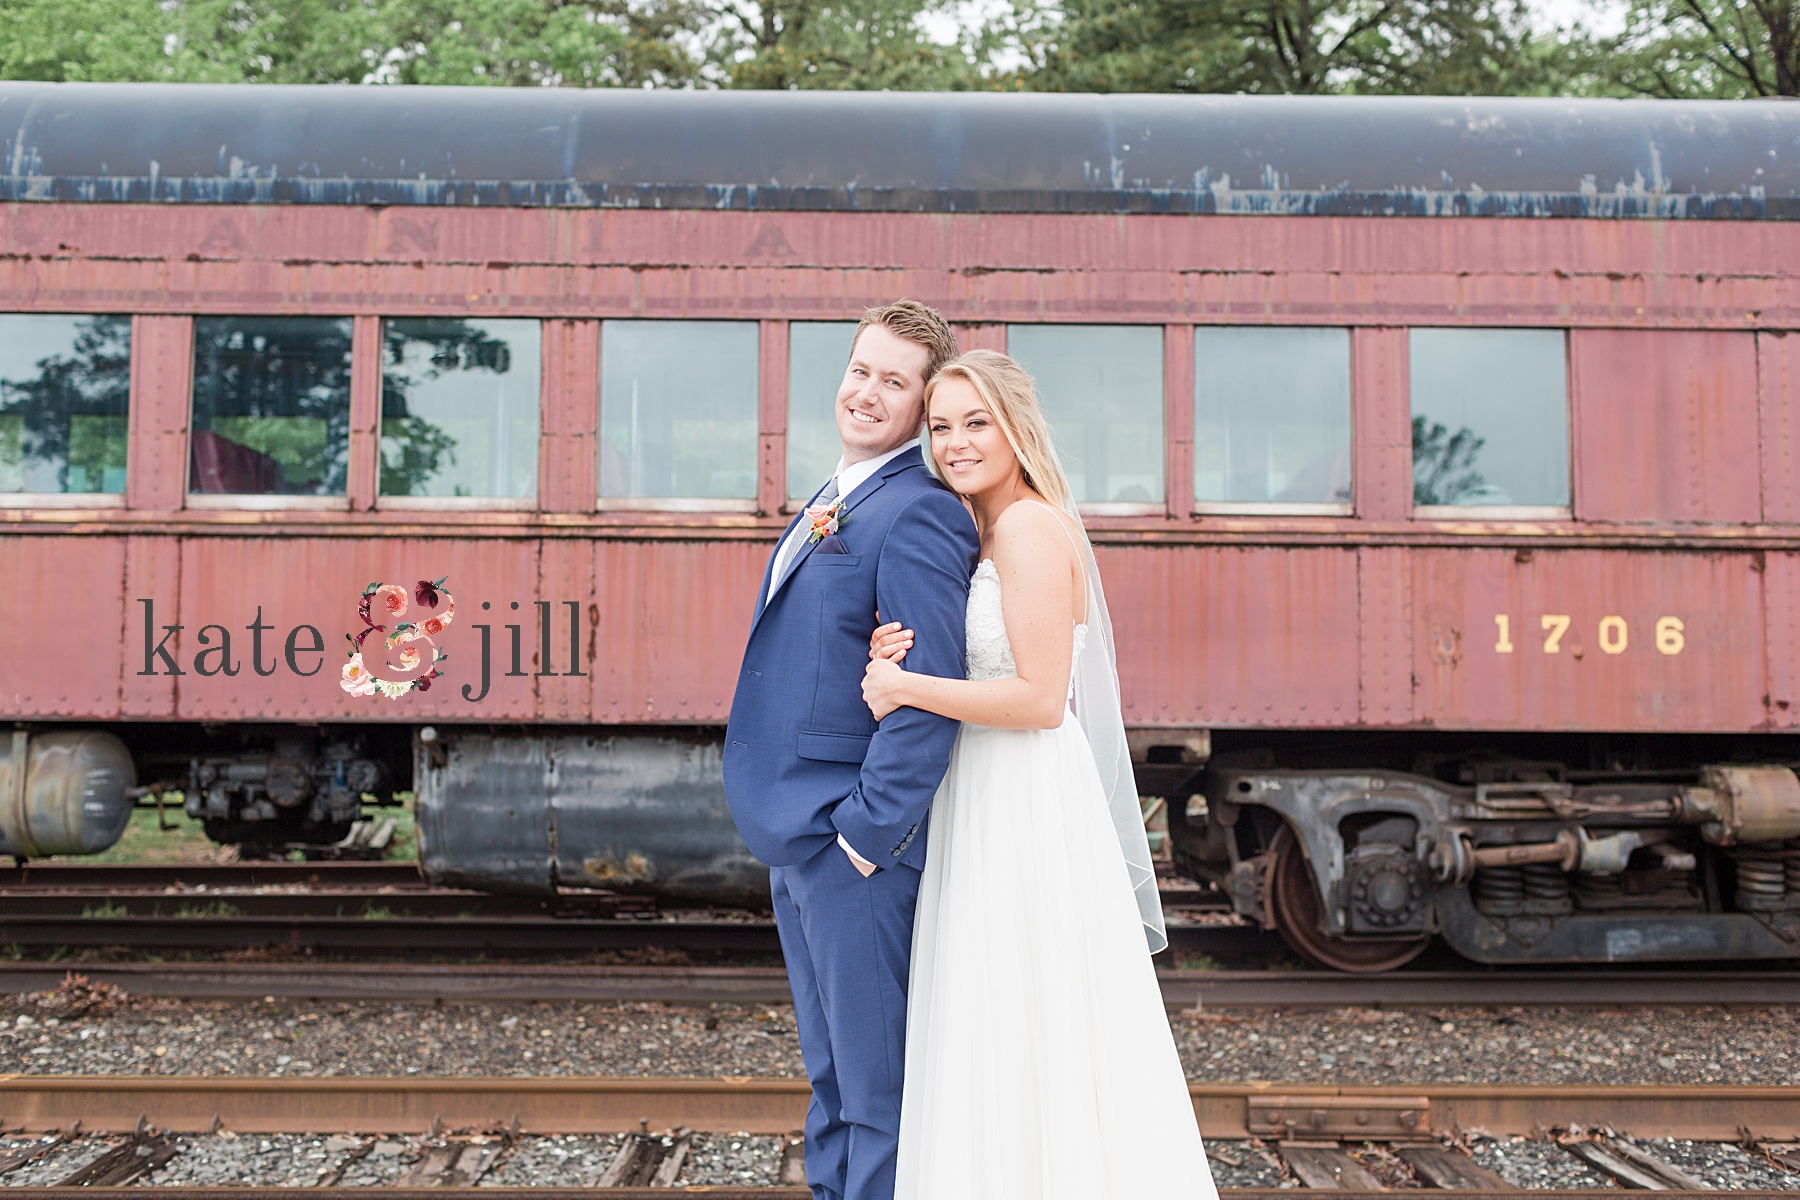 bride and groom in front of train cars at venue